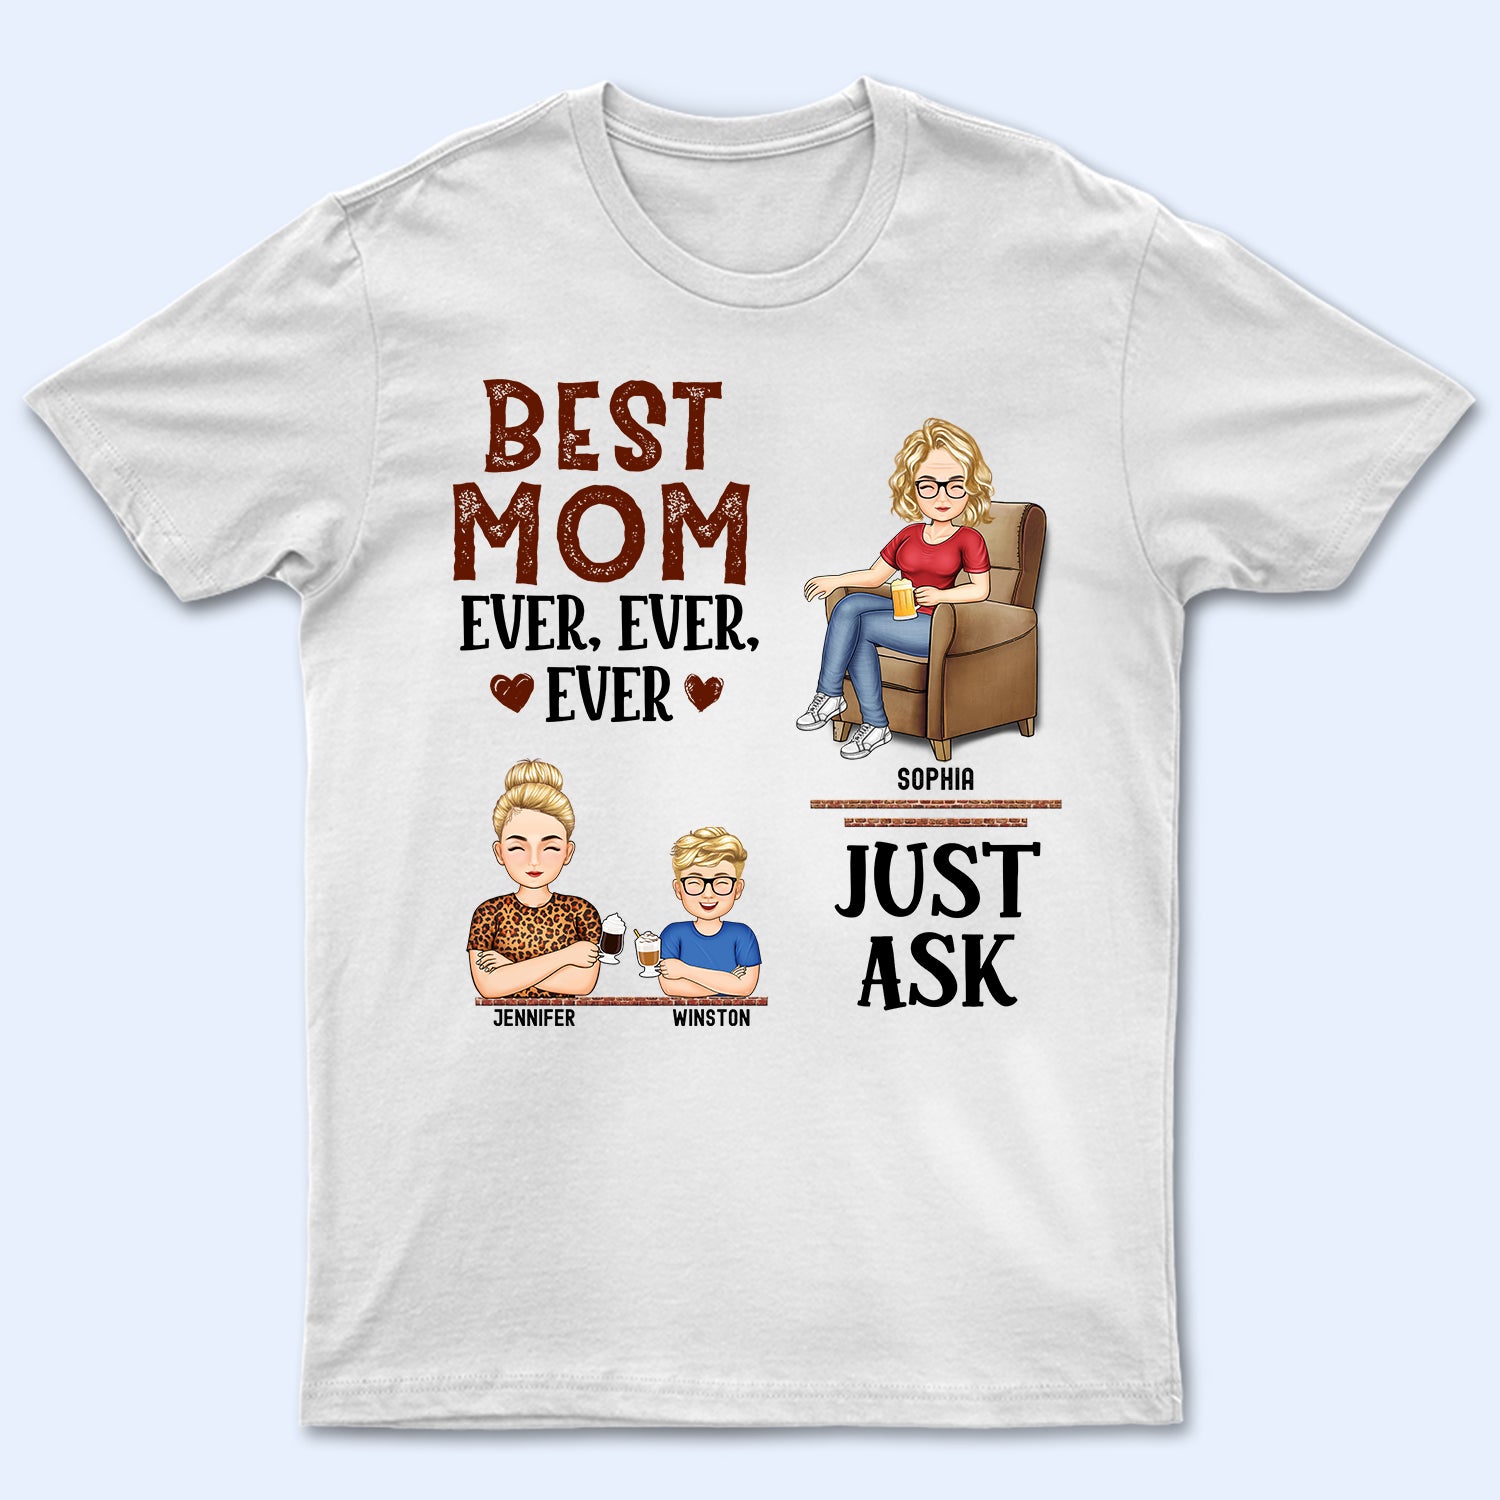 Best Mom Ever Ever Ever Just Ask - Birthday, Loving Gift For Mommy, Mother, Grandma, Grandmother - Personalized Custom T Shirt